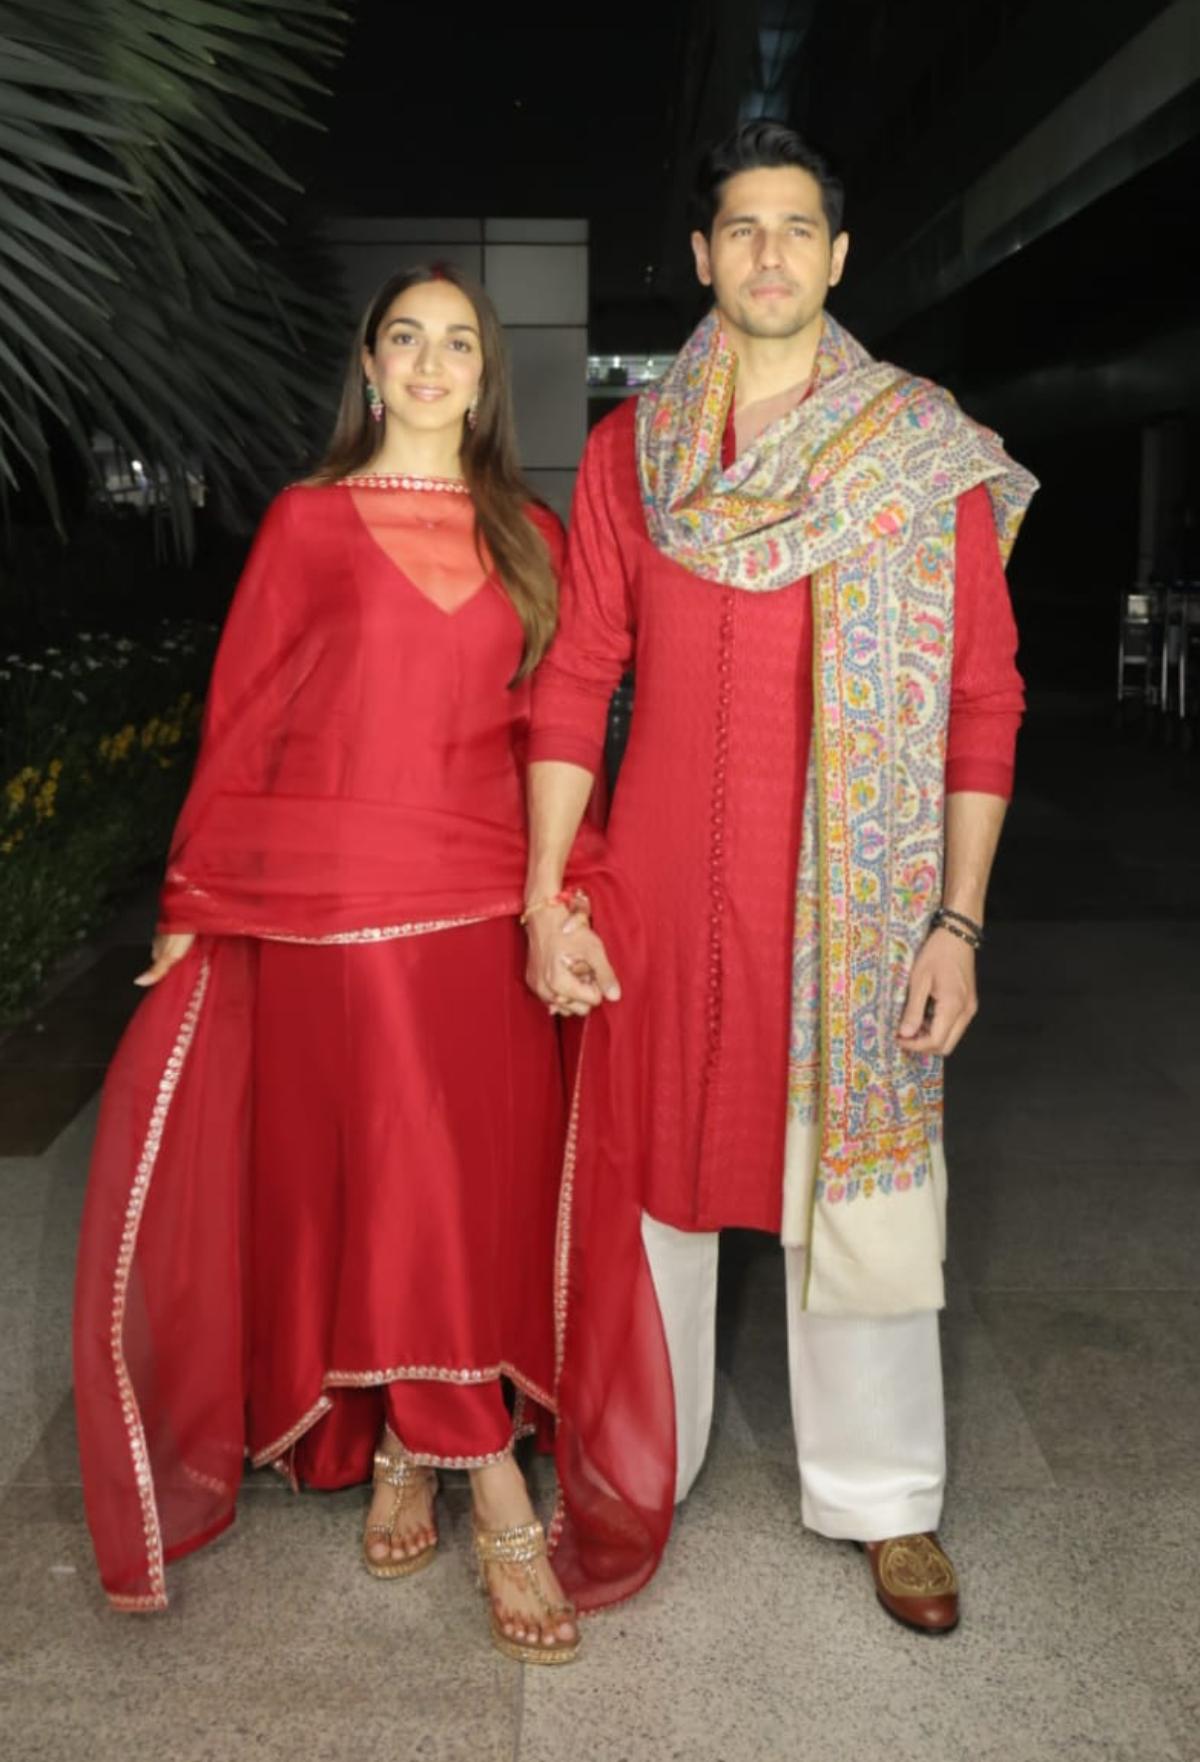 Giving major couple goals, Sidharth and Kiara painted 'Dil walon ki Dilli' red as they twinned in traditional red outfits. While our dulhaniya looked stunning in a red anarkali suit, our OG Punjabi munda looked dapper in a red kurta and white pyjama which he topped up with a multi-coloured shawl. Giving us all the 'nayi bahu' vibes, Kiara looked beautiful as she sported sindoor, mangalsutra and her pink chuddas. 